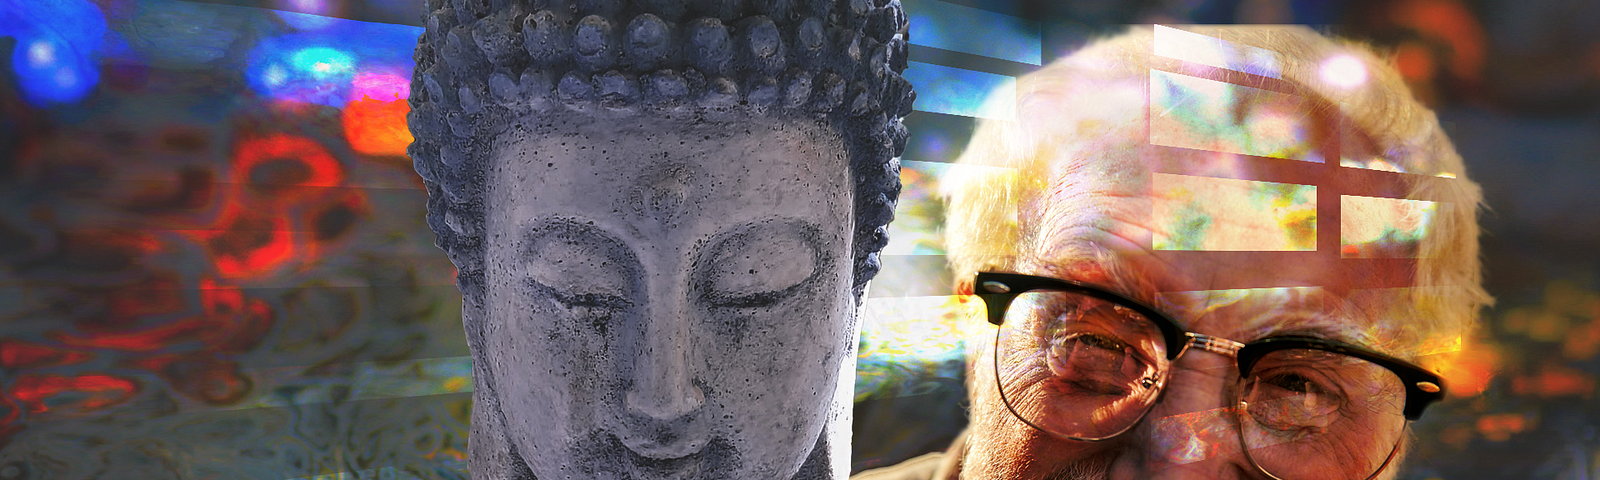 Budda overlooking shoulder of chuckling old man, abstract background